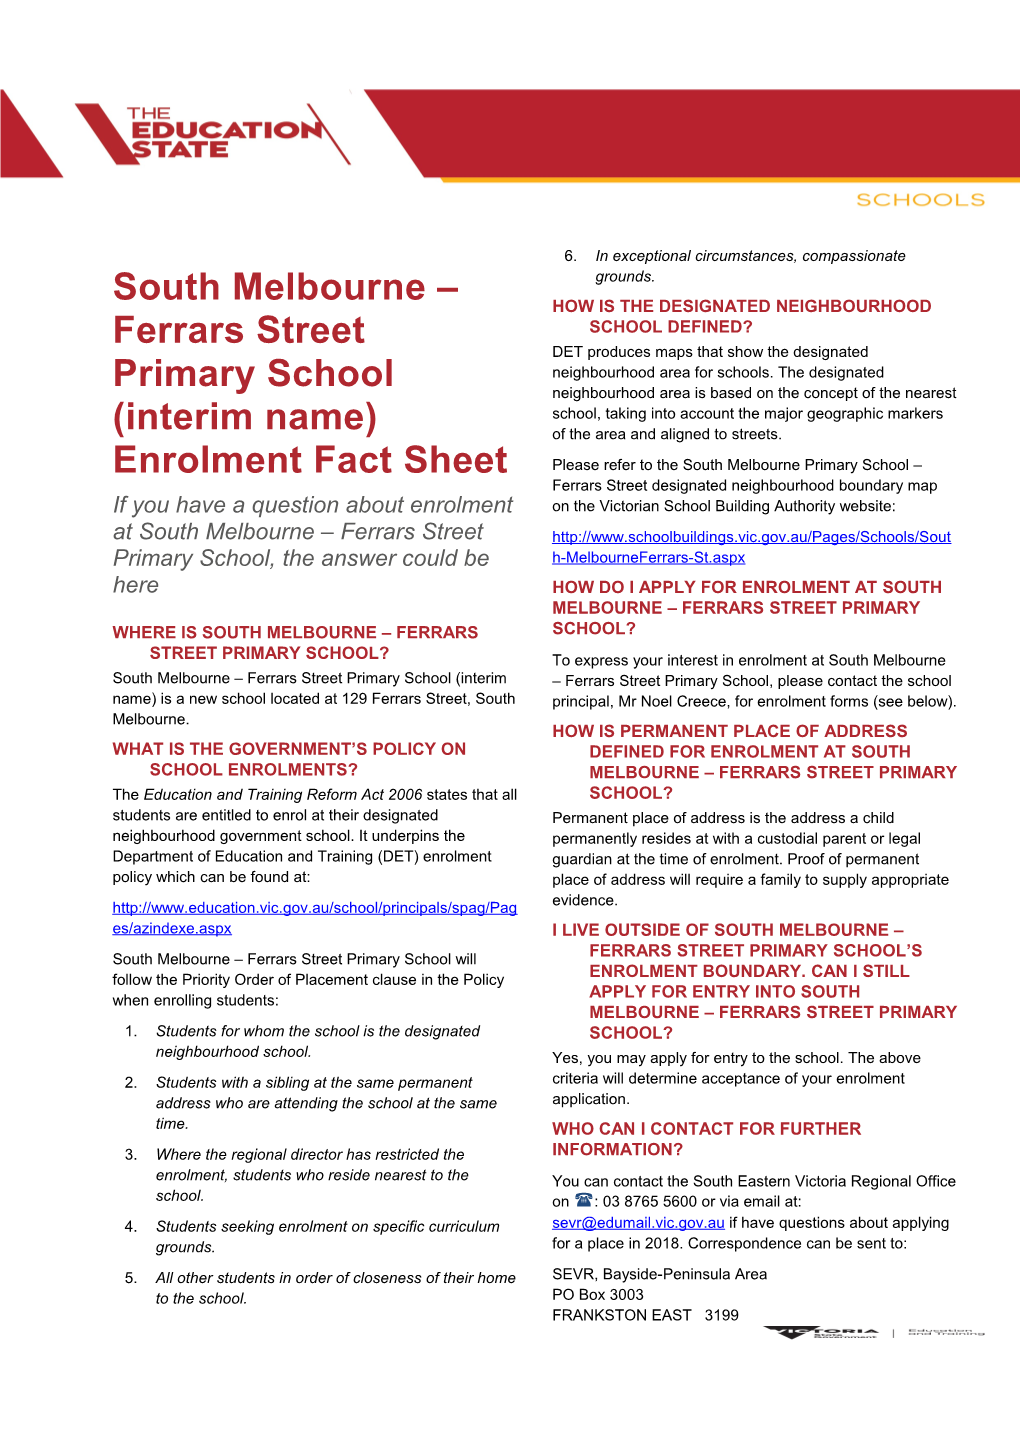 BRI011323 Attachment 1 - Education State Fact Sheet - Taylors Hill West Secondary College s1